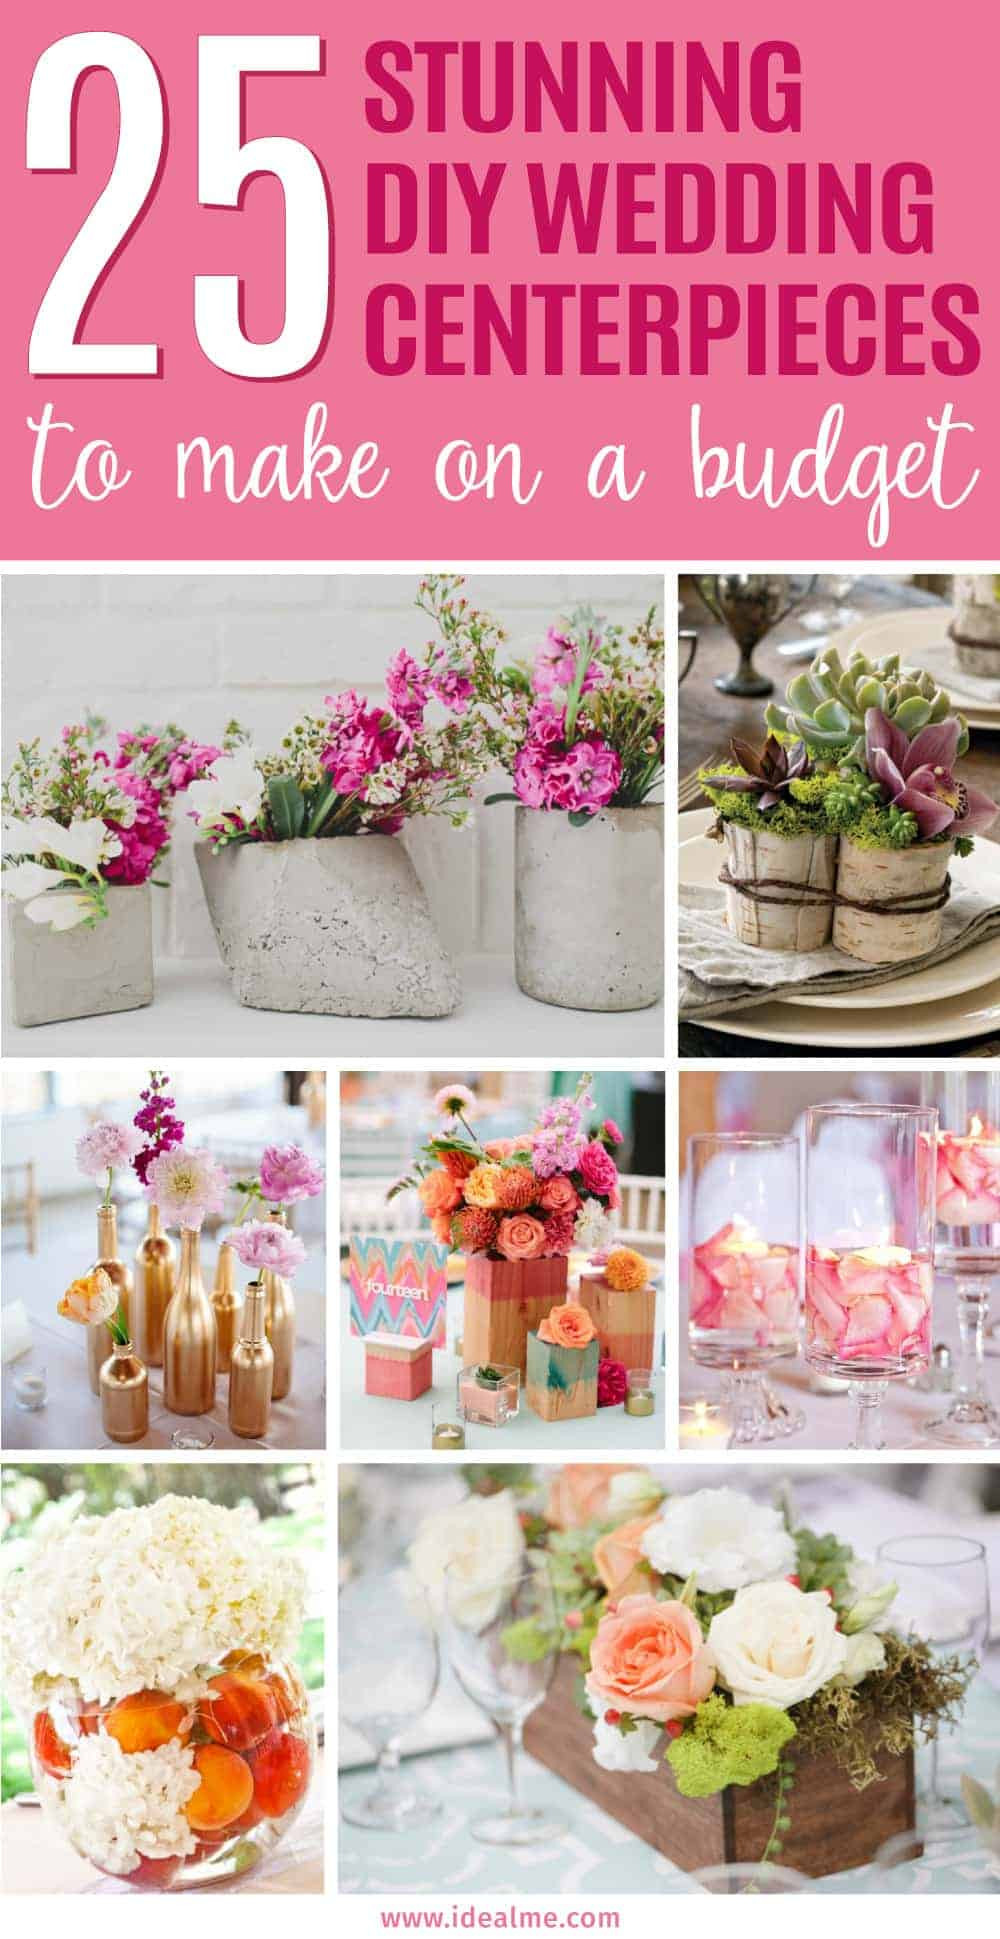 Best ideas about Cheap DIY Wedding Centerpieces
. Save or Pin 25 Stunning DIY Wedding Centerpieces to Make on a Bud Now.